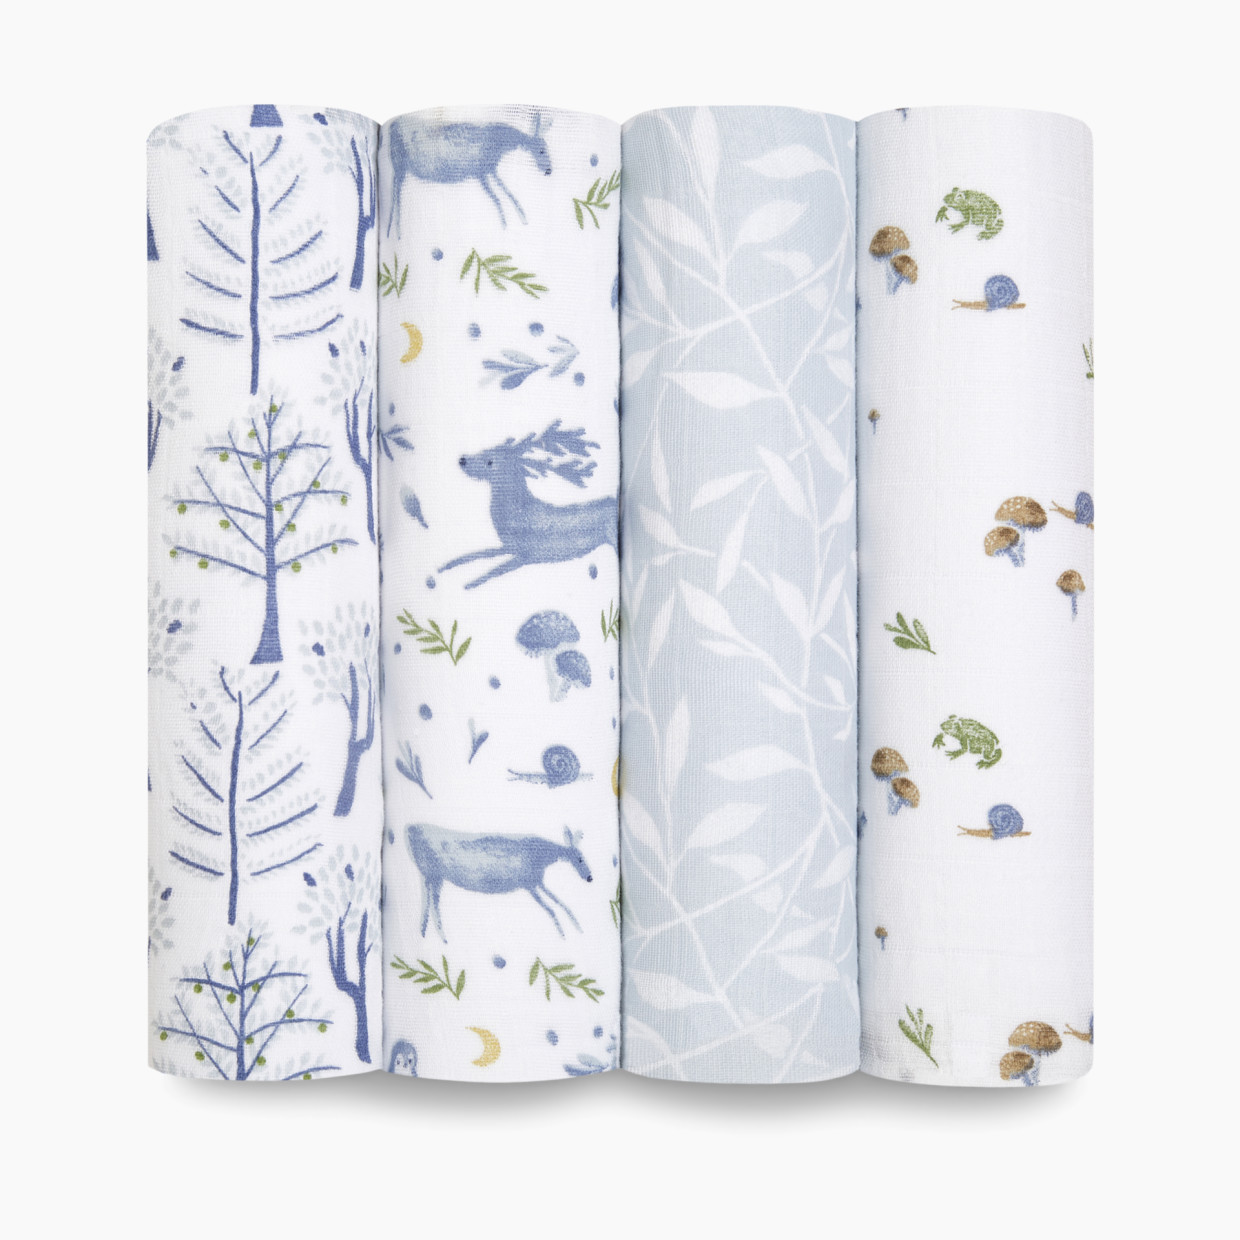 Aden + Anais Cotton Muslin Swaddle 4-Pack - Outdoors.